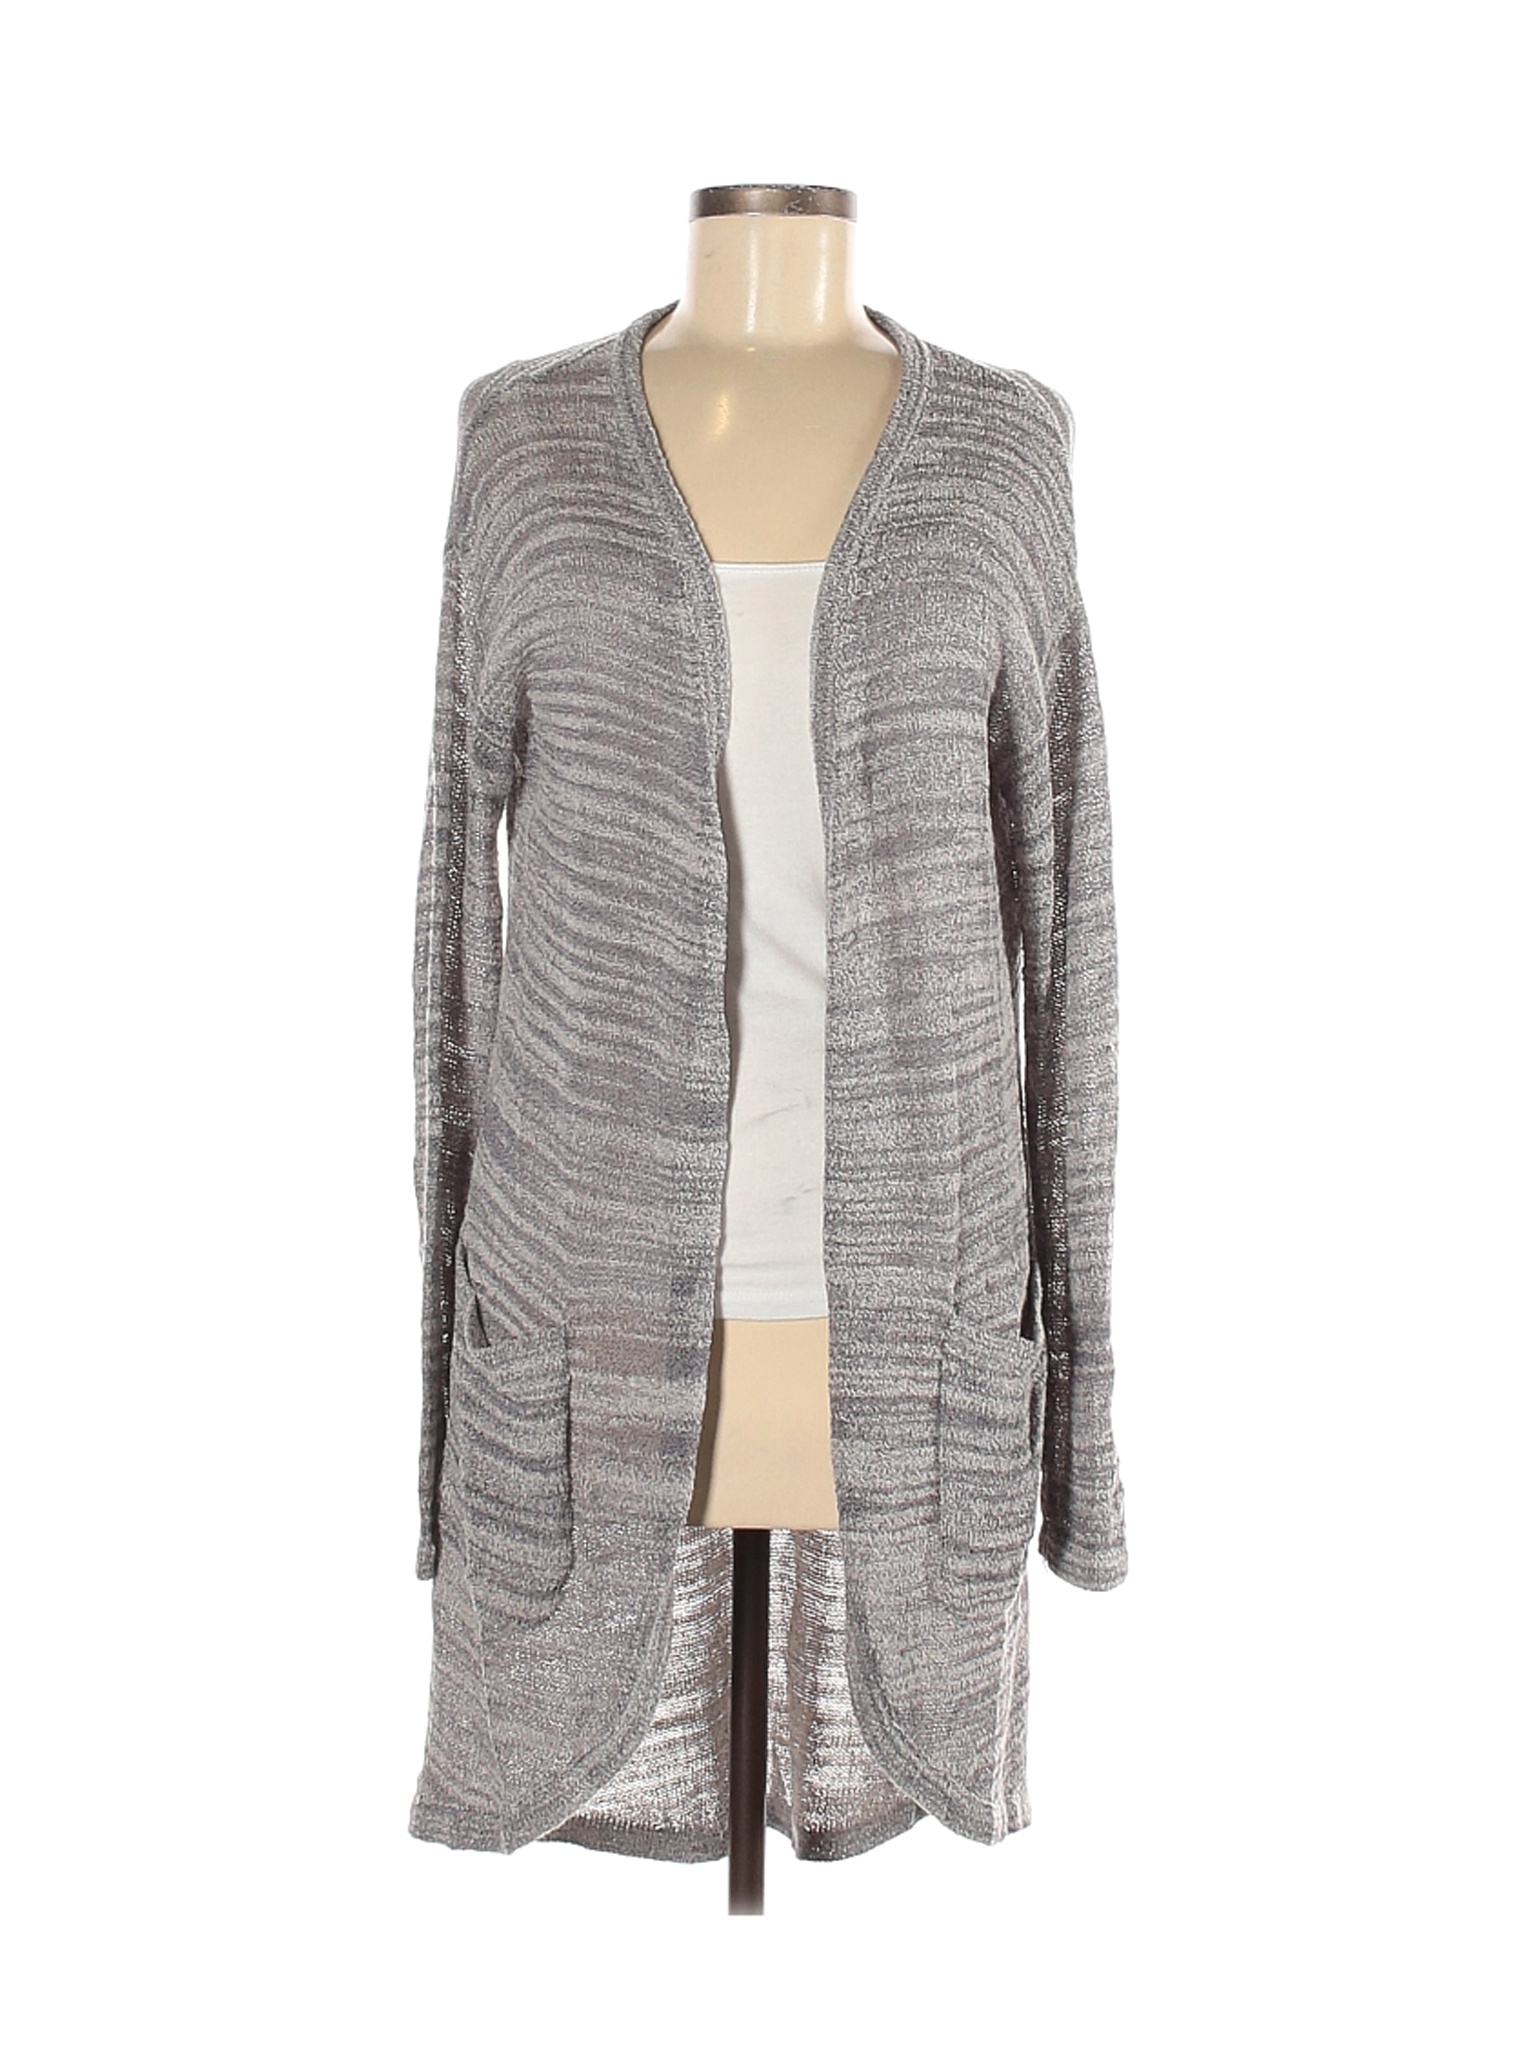 H By Halston Color Block Marled Gray Cardigan Size M - 95% off | thredUP